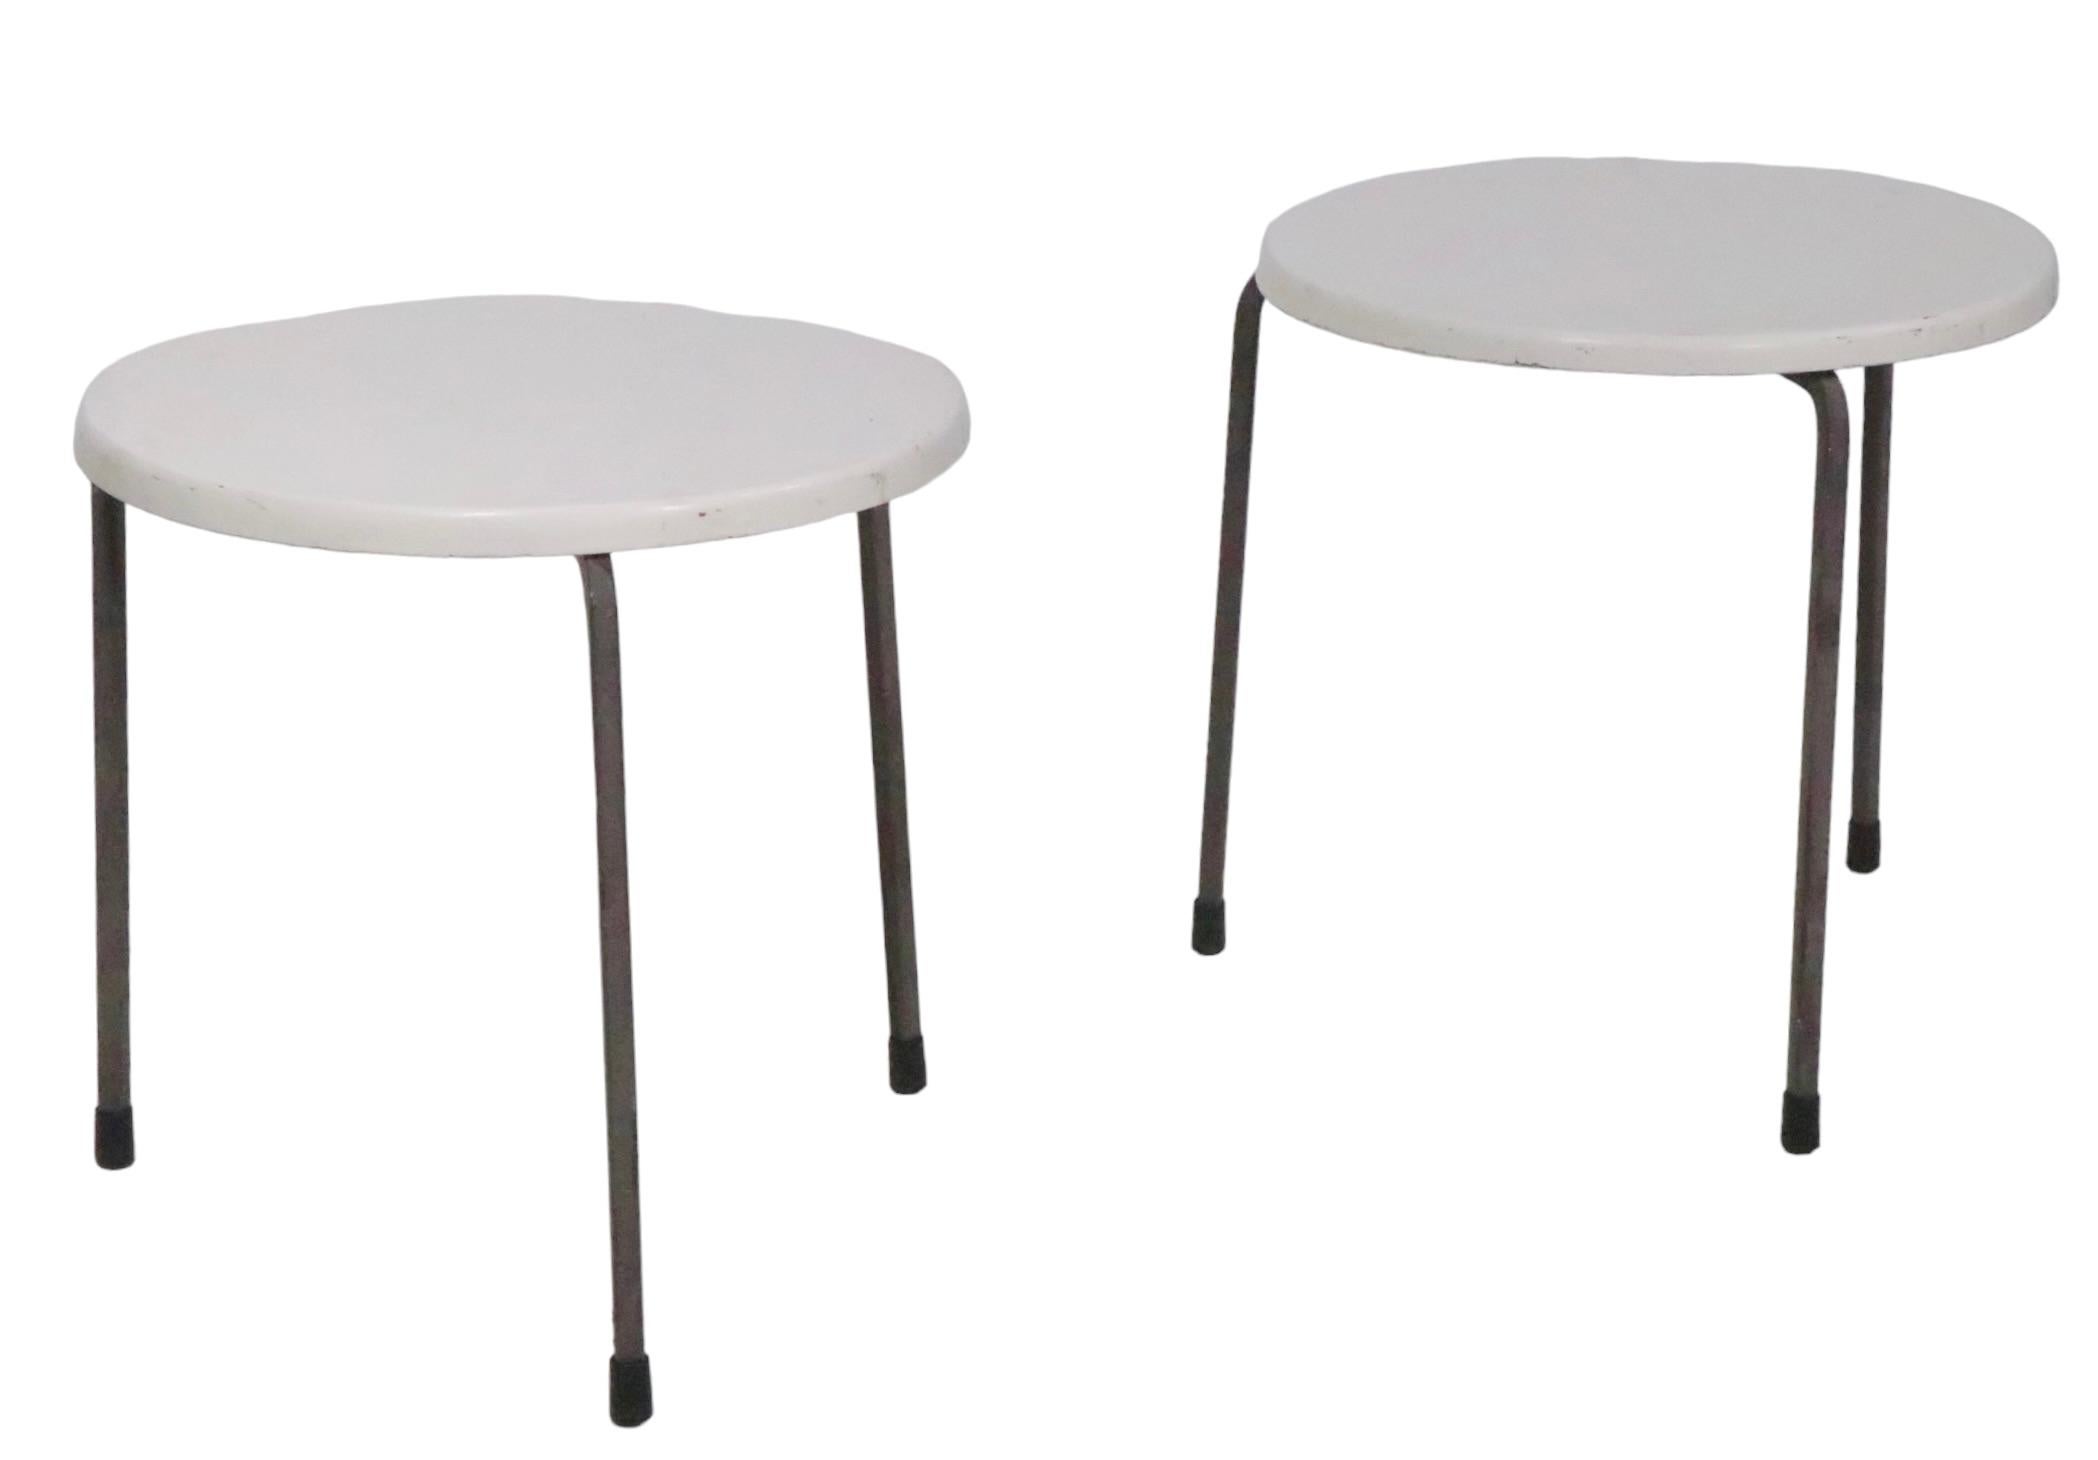 Pr.  Mid Century Patio Poolside Tables by Fibreform Made in Florida c.1950/1970s For Sale 10